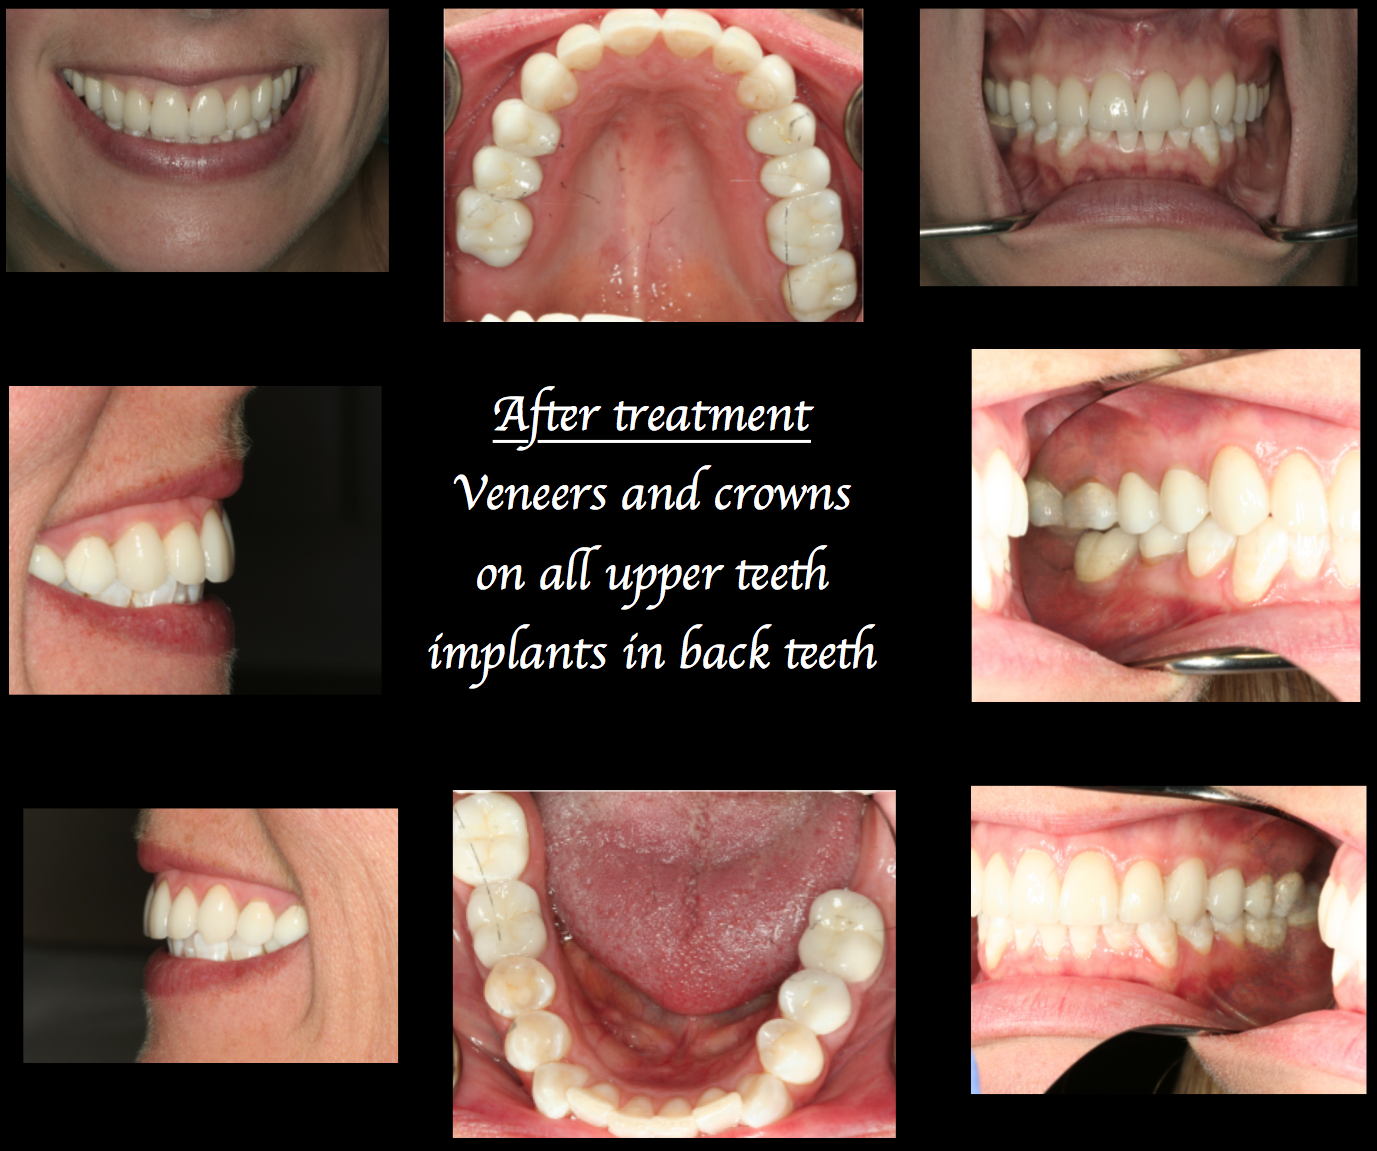 Veeners and crowns on all upper teeth and implants in back teeth